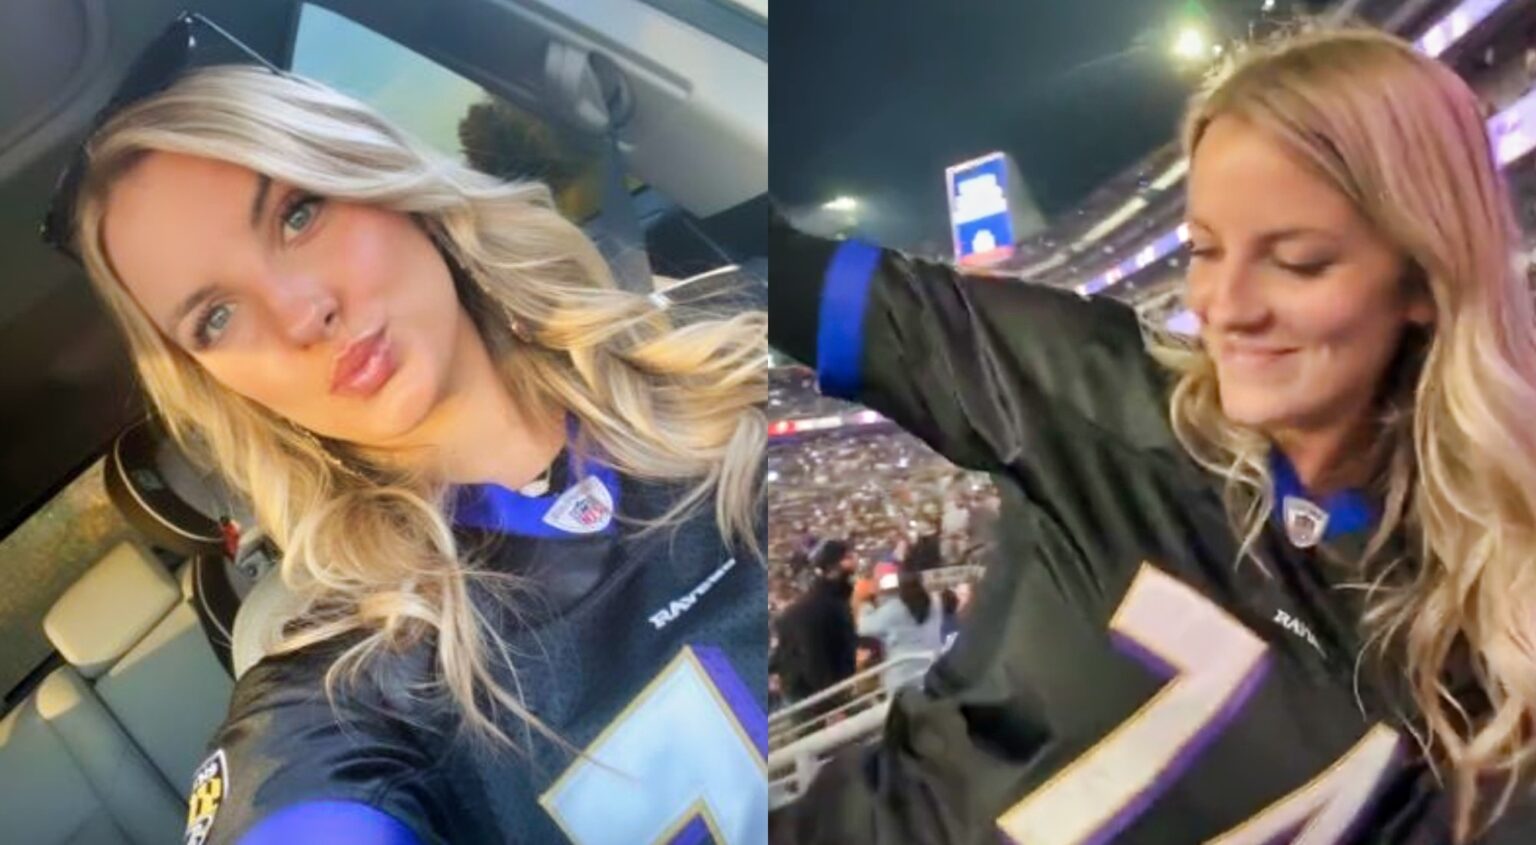 The Female Ravens Fan Who Was Spotted Acting Freaky in the Stands During TNF Has Been Identified by Social Media Detectives (VIDEO + PICS)